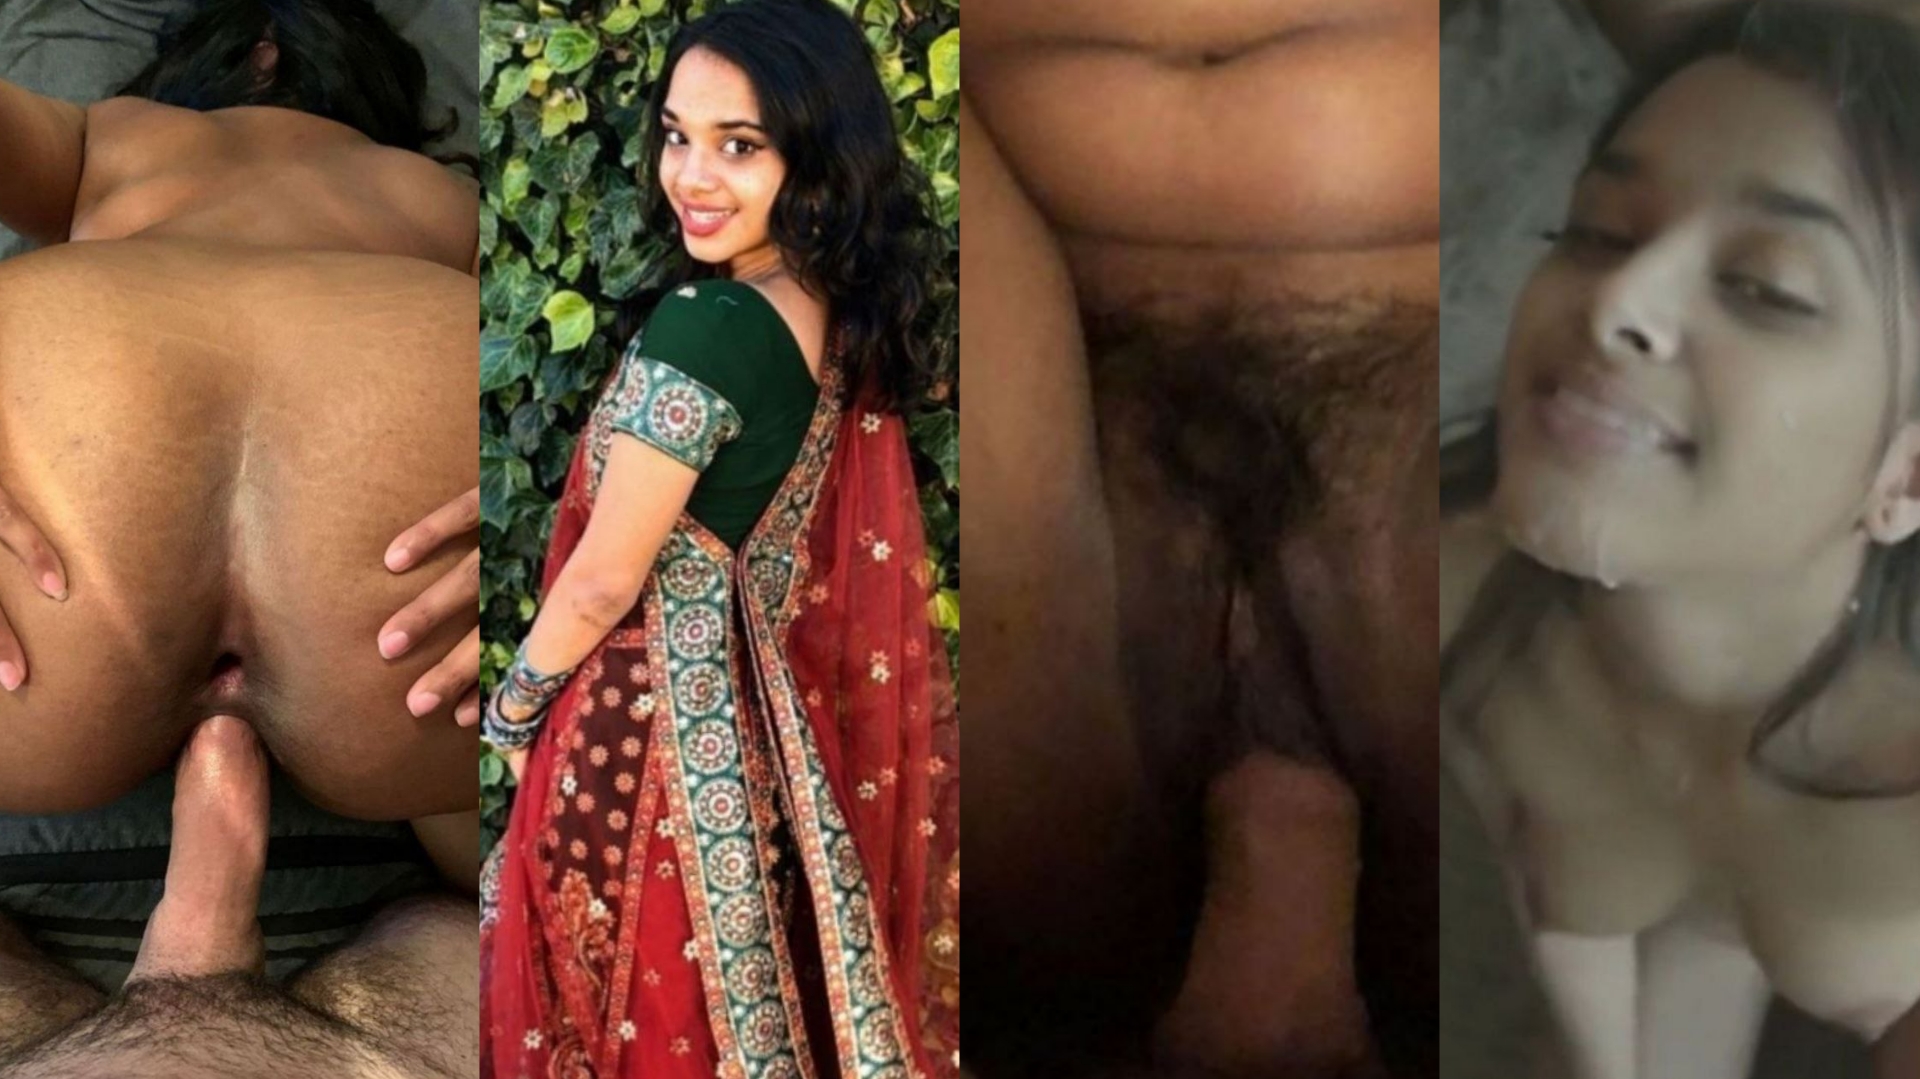 Indian Desi Hot Girlfriend Chudai Very Hot And Horny Sexual Fuck Video Viral